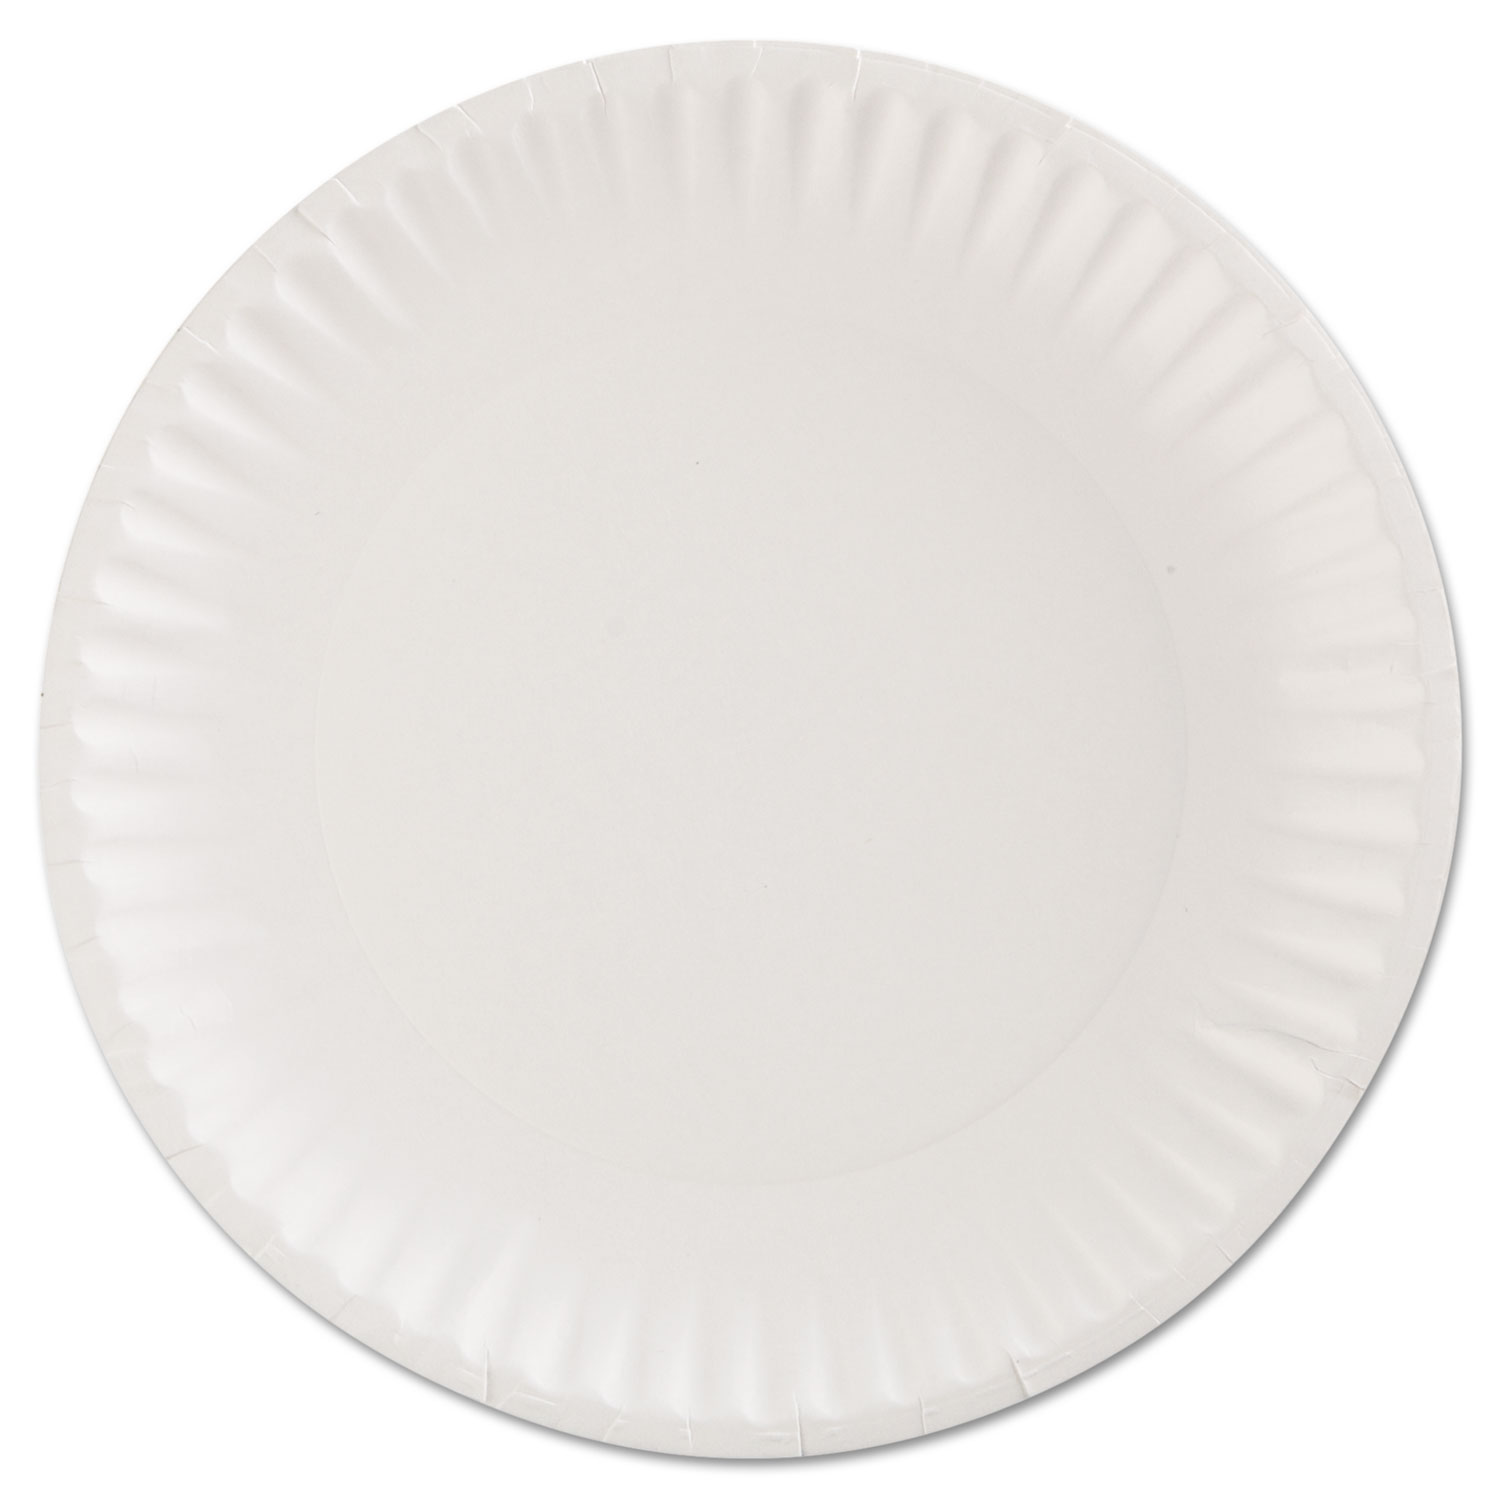 Gold Label Coated Paper Plates, 9 dia, White, 100/Pack, 10 Packs/Carton